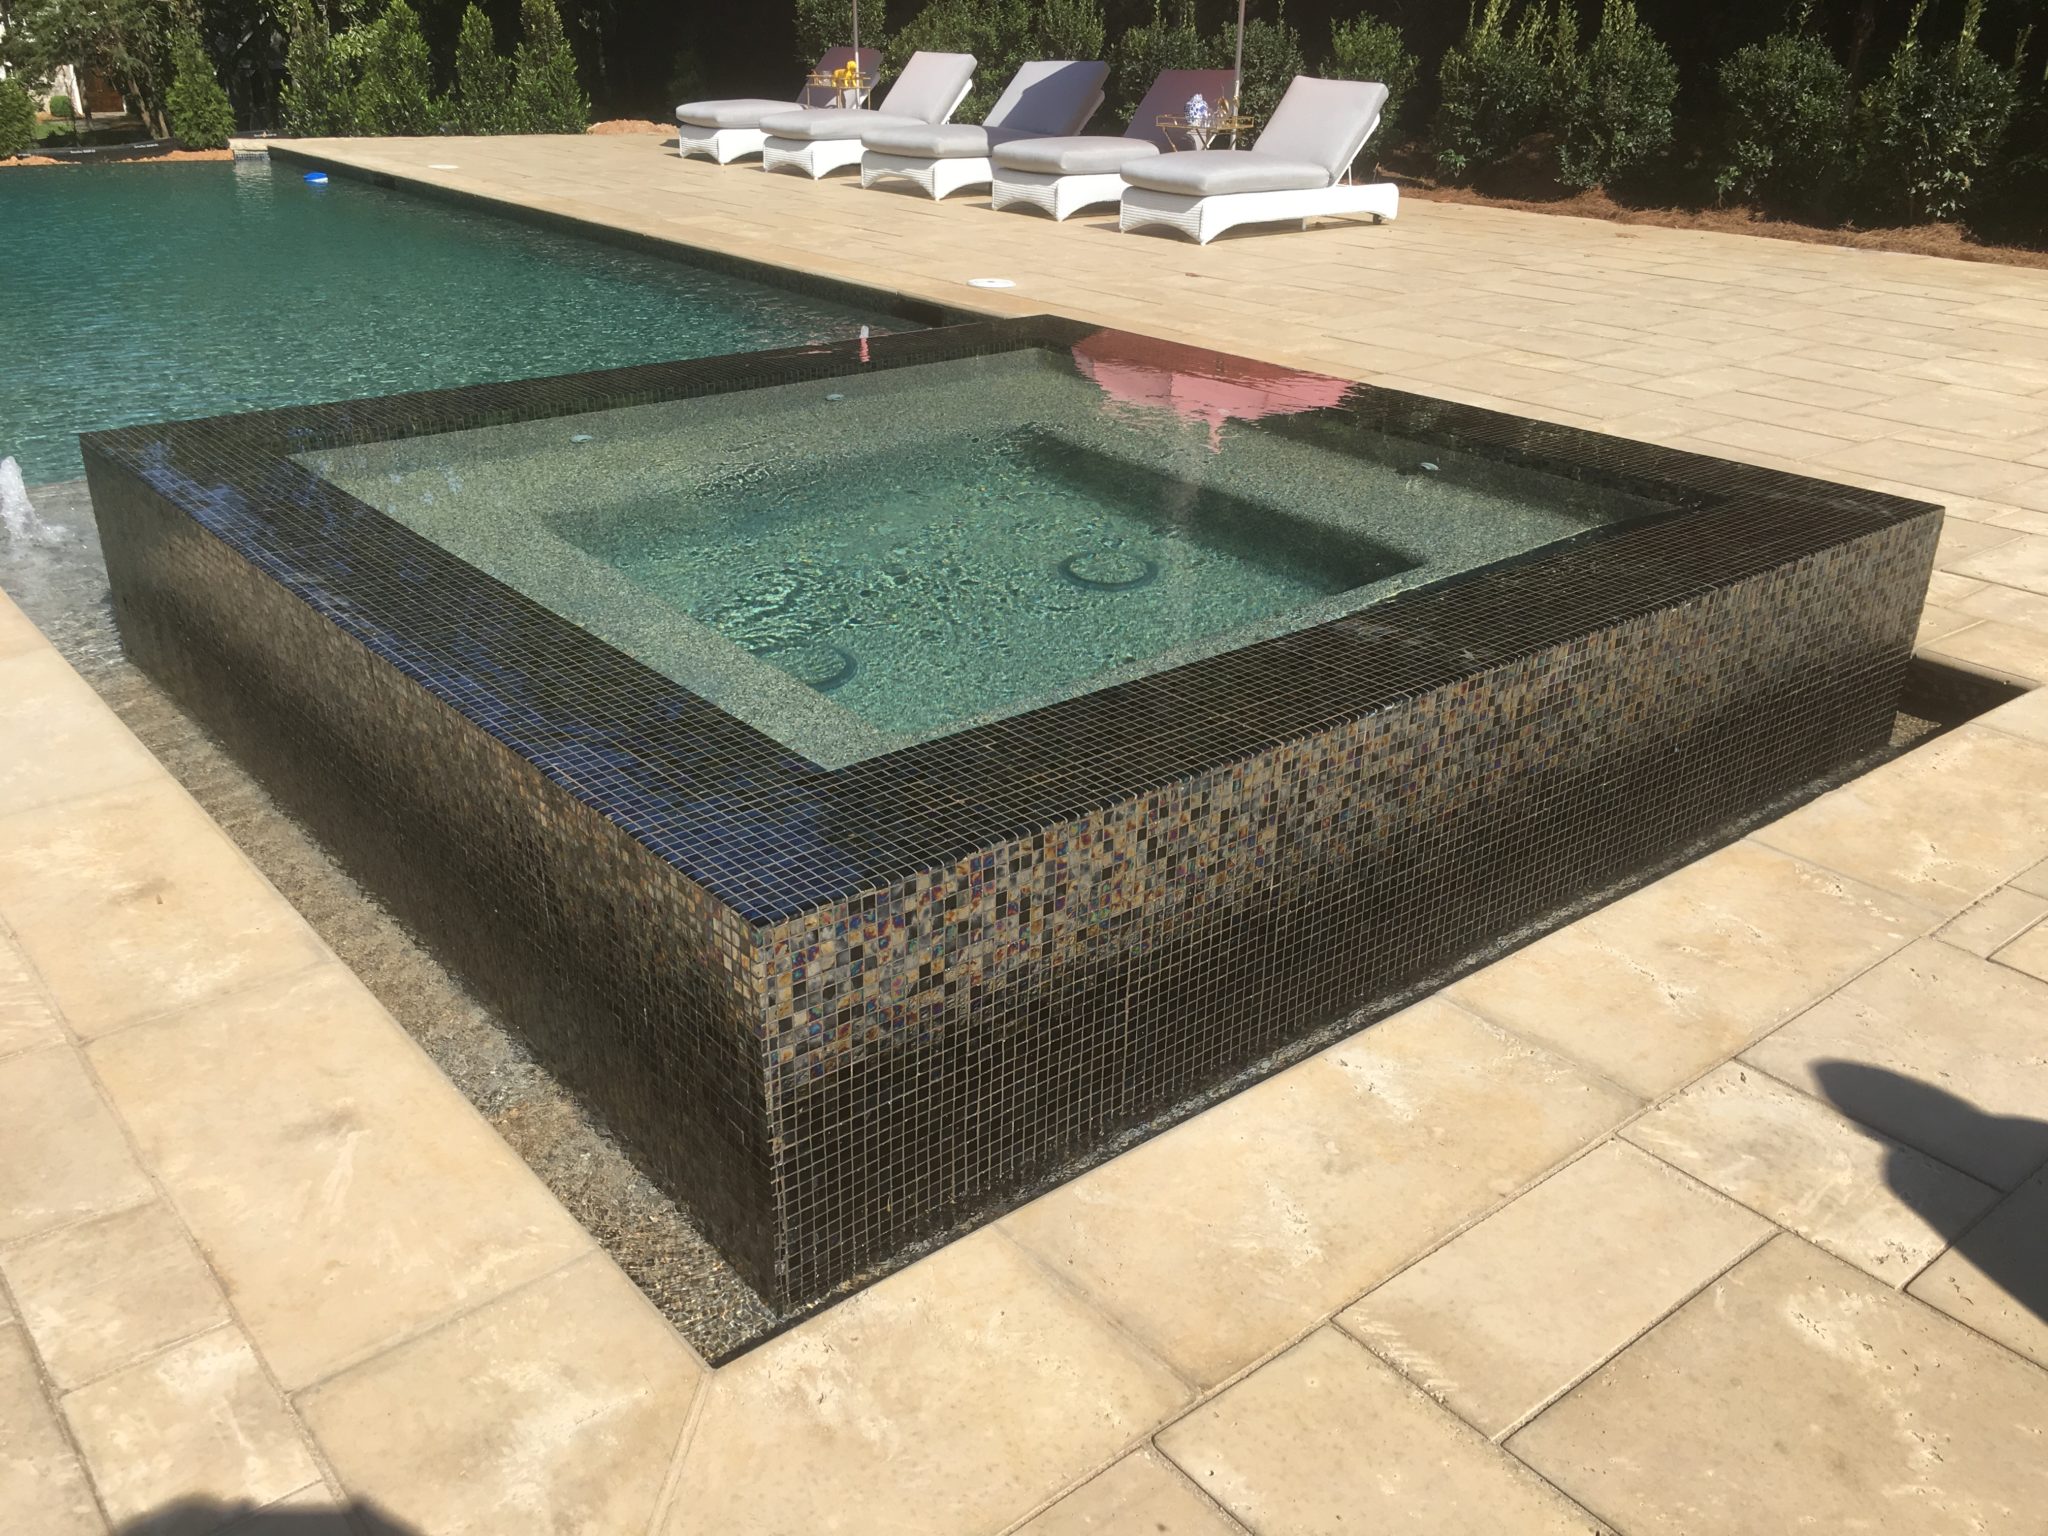 A raised square spa with vibrant custom multicolor tilework and water cascading over the edges.